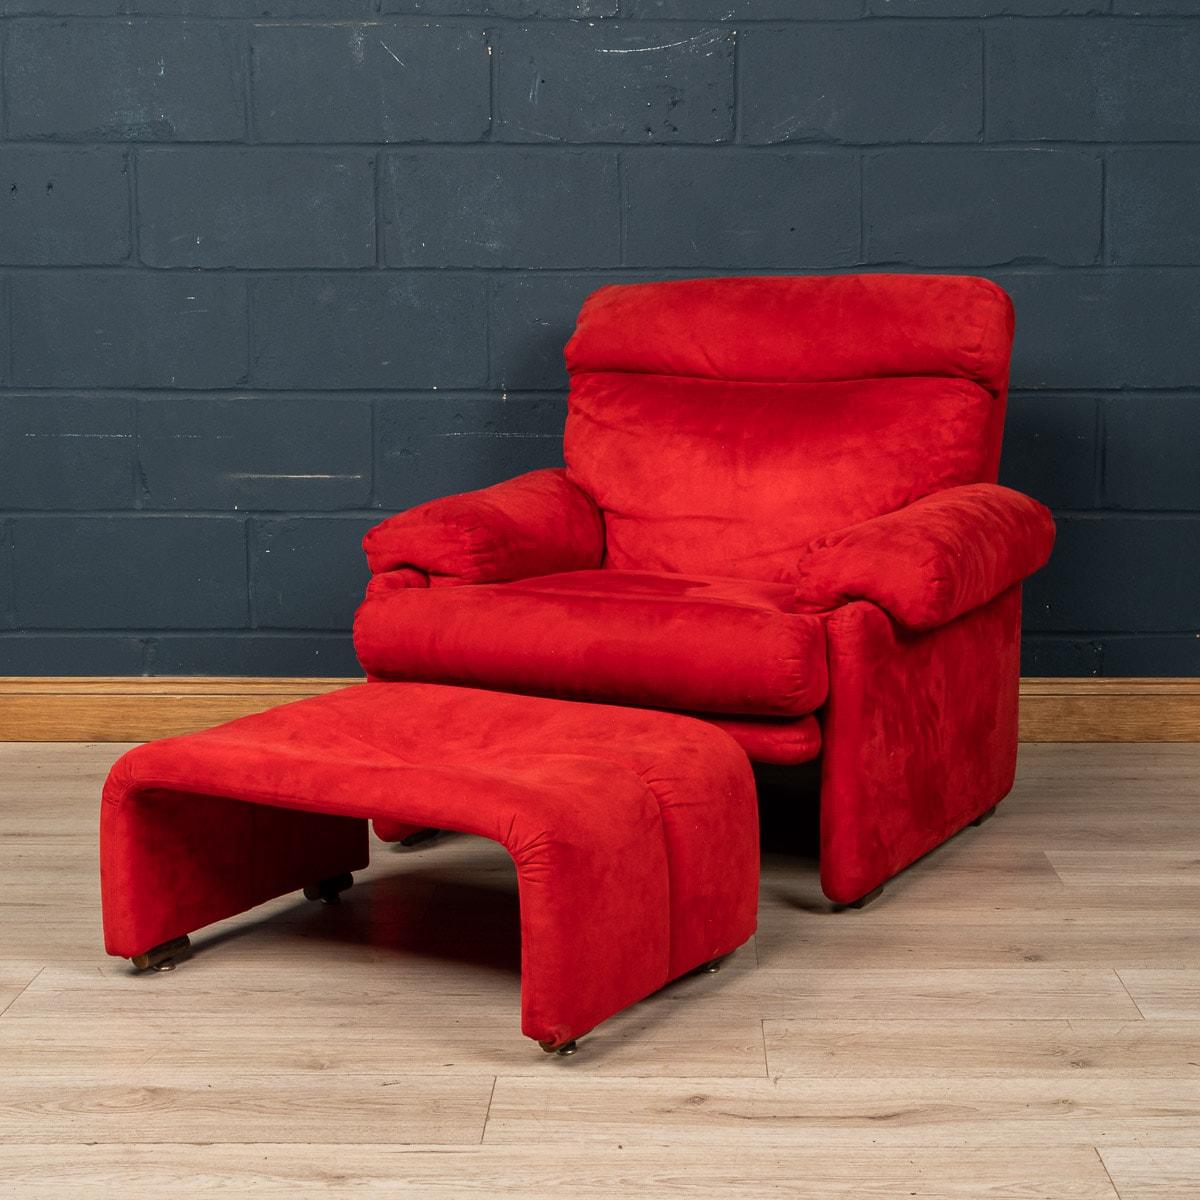 A beautiful “Coronado“ armchair and footstool by Tobia Scarpa for B&B Italia, made in Italy around the latter part of the 20th century. Finished in a very rare red suede leather, it comes with its matching red footstool. A lovely way to bring colour